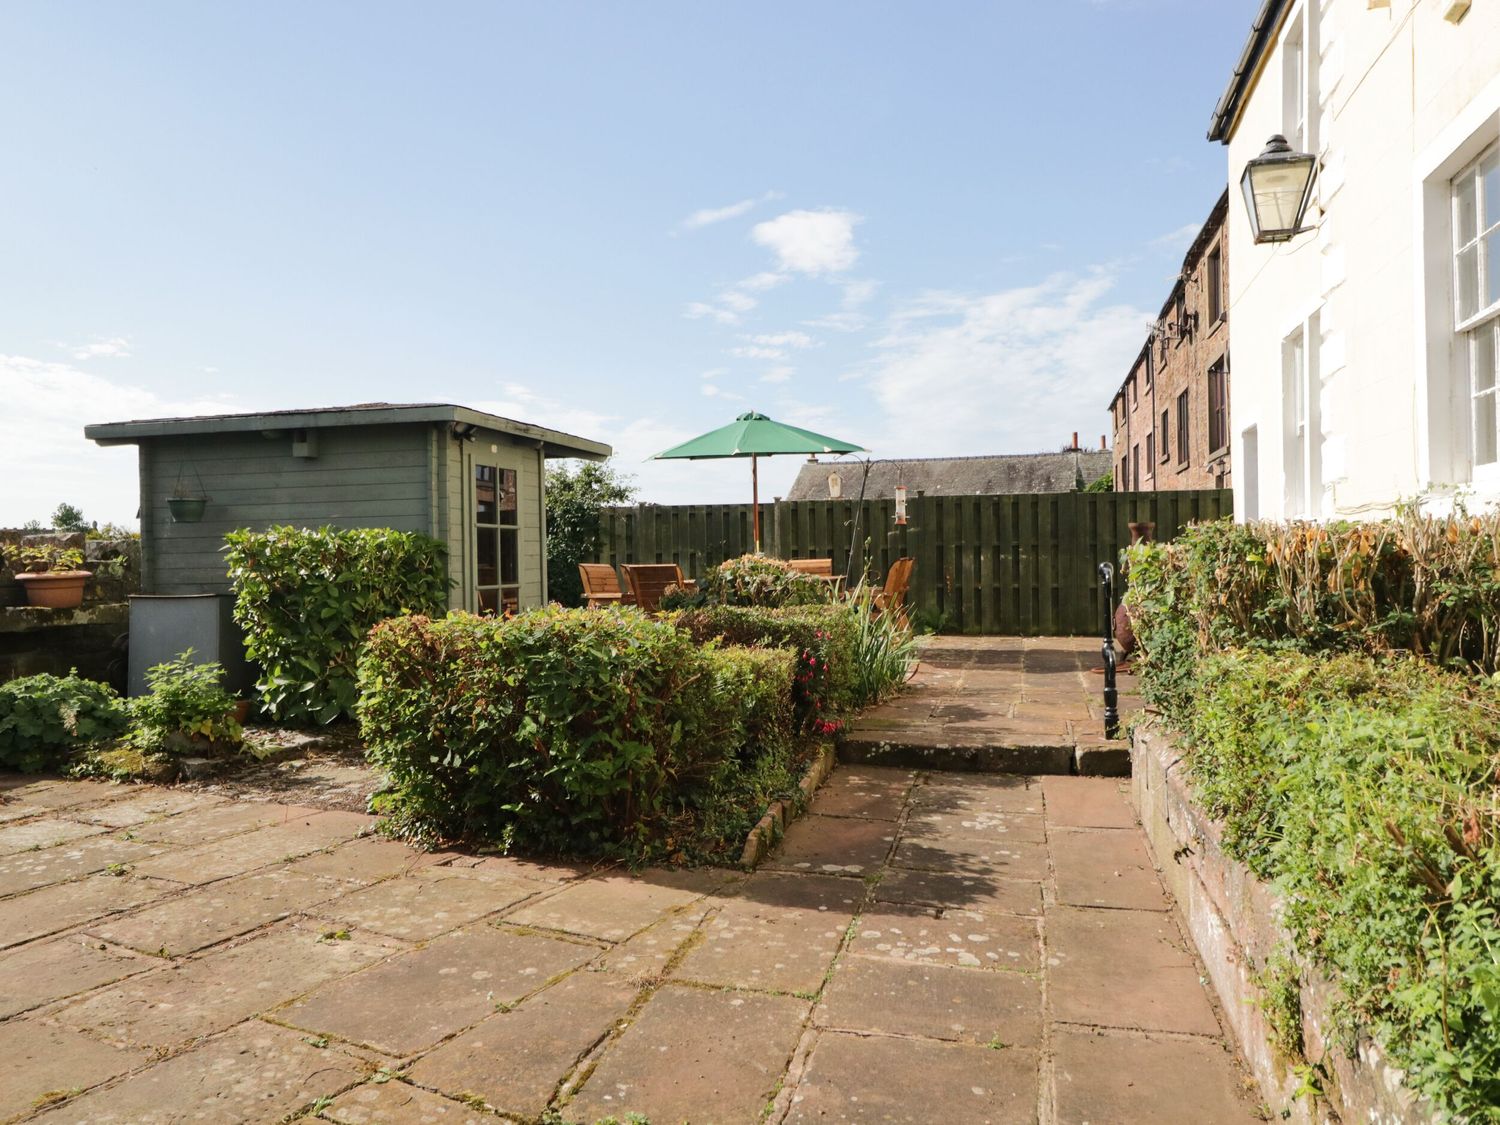 Abbey Farm House, St Bees, Cumbria. Large property sleeping 16. Pet-friendly. Off-road parking. AGA.